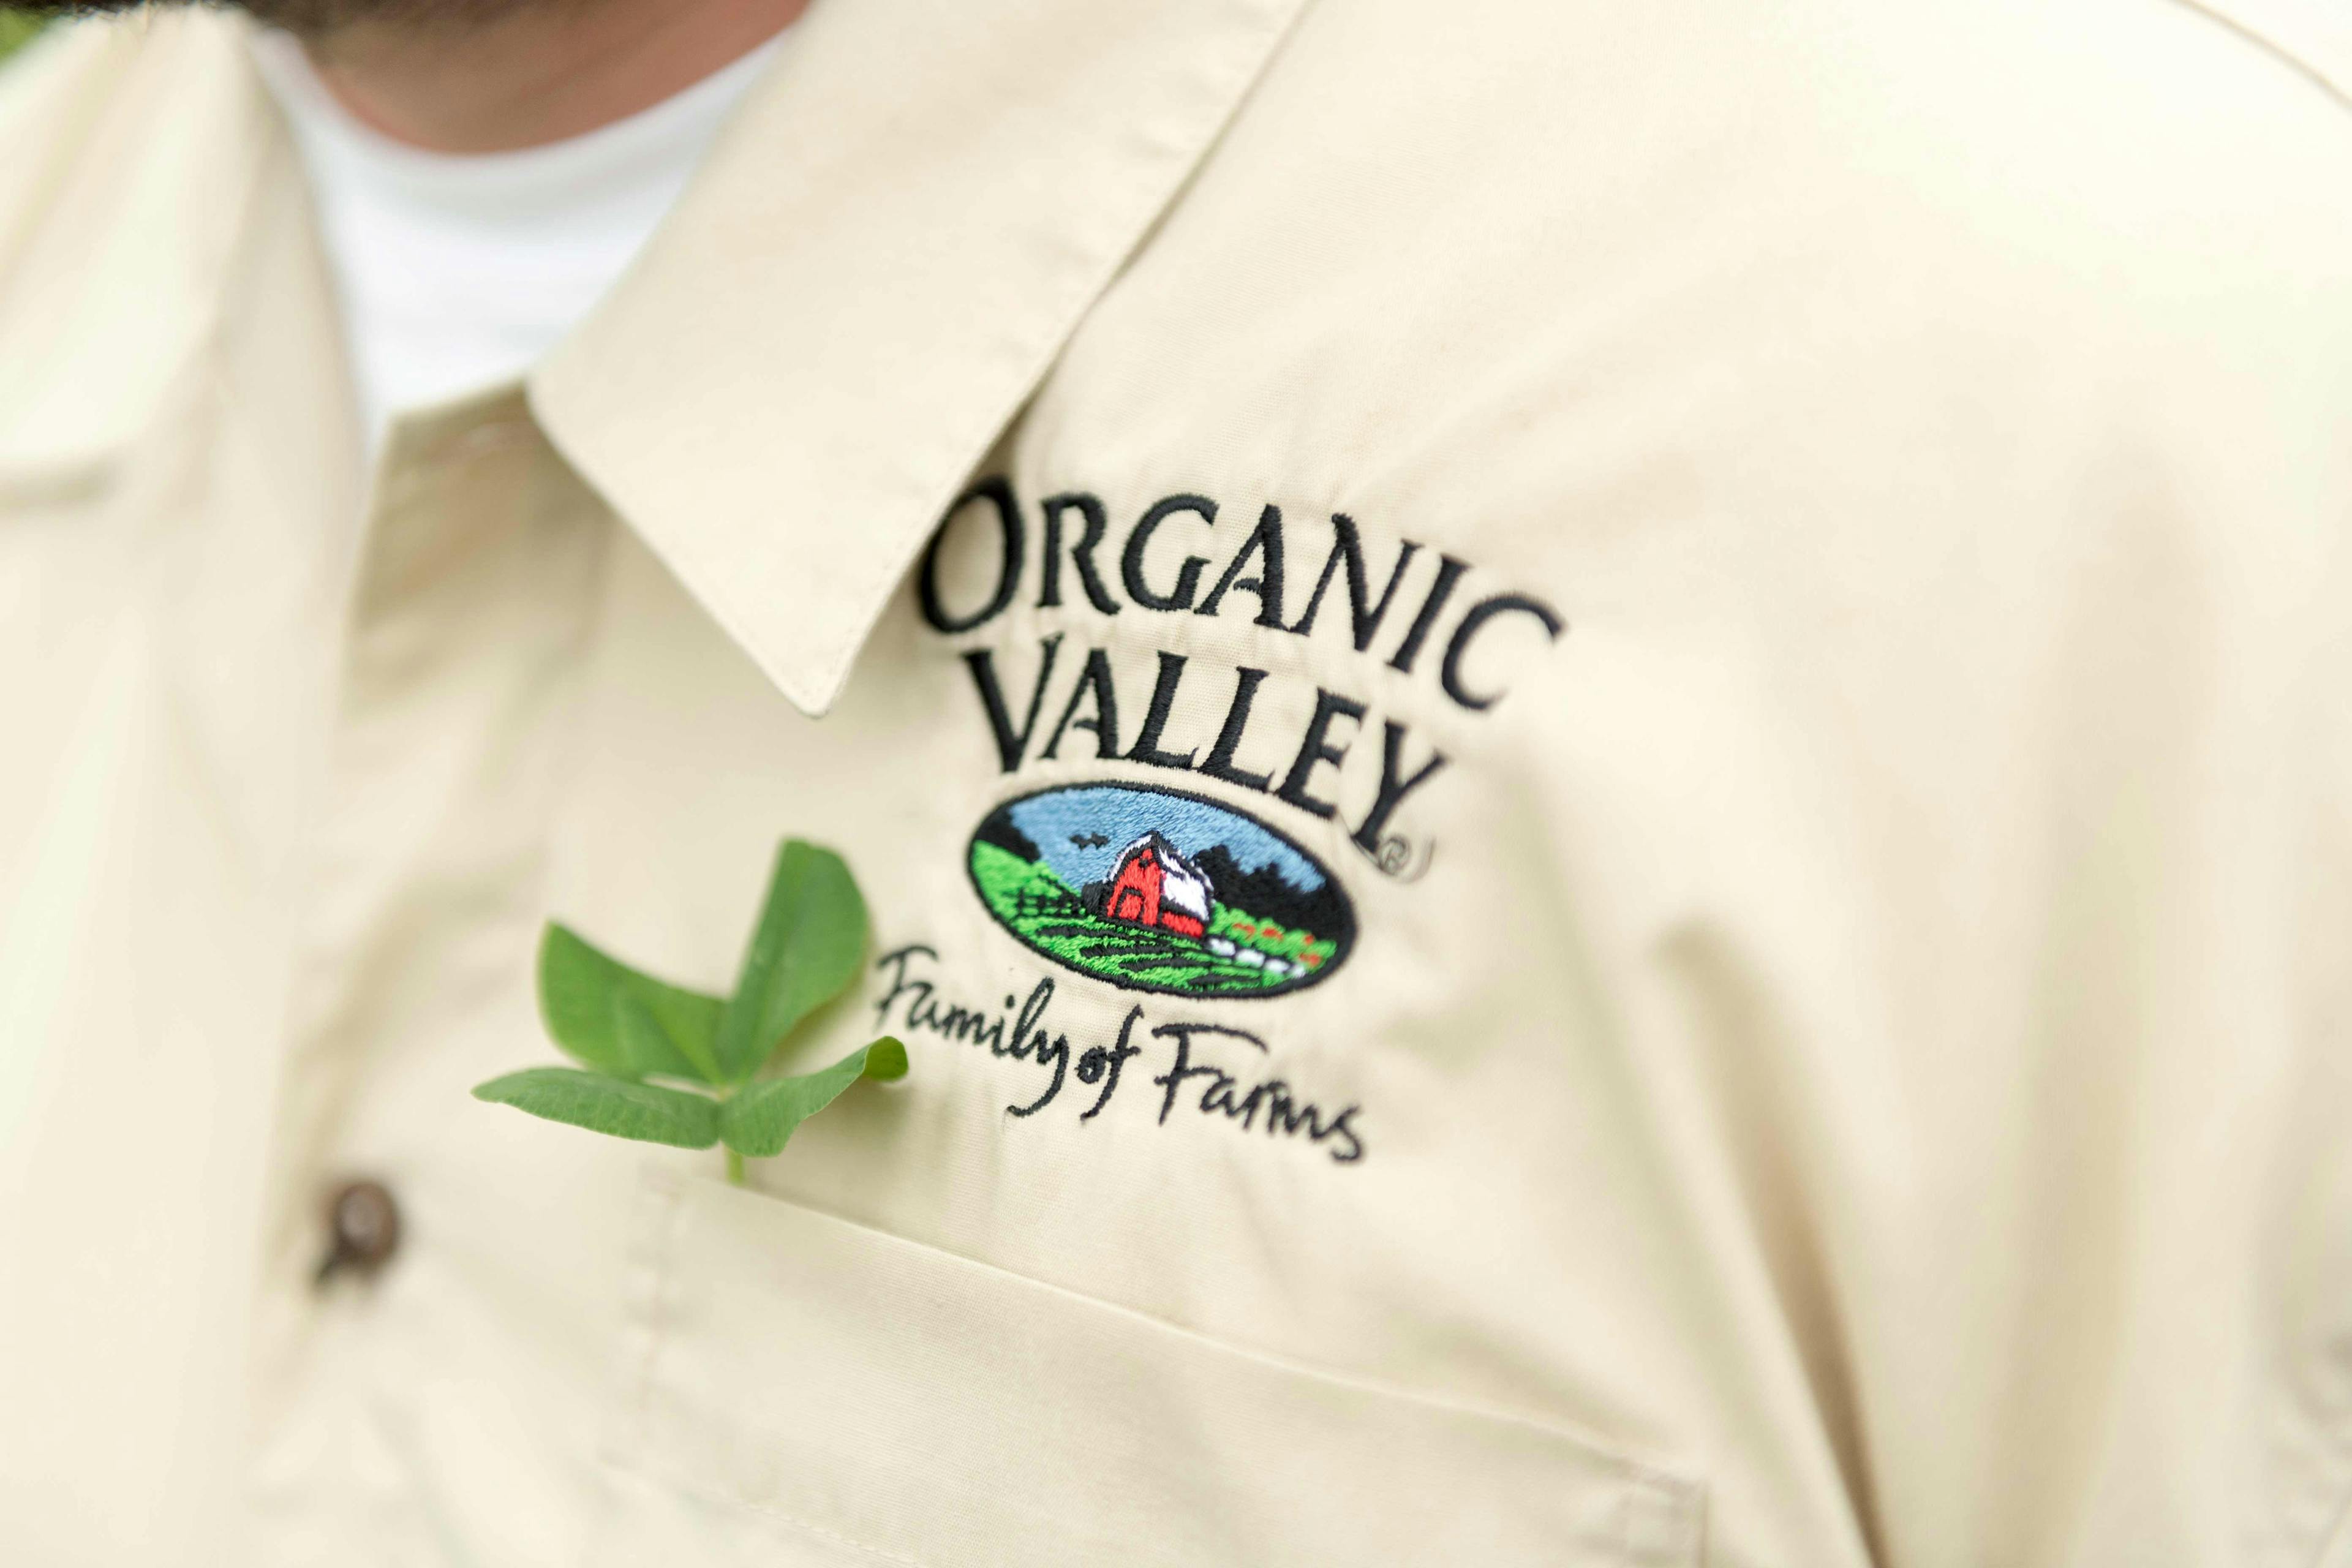 Organic Valley helps independent family farms stay independent